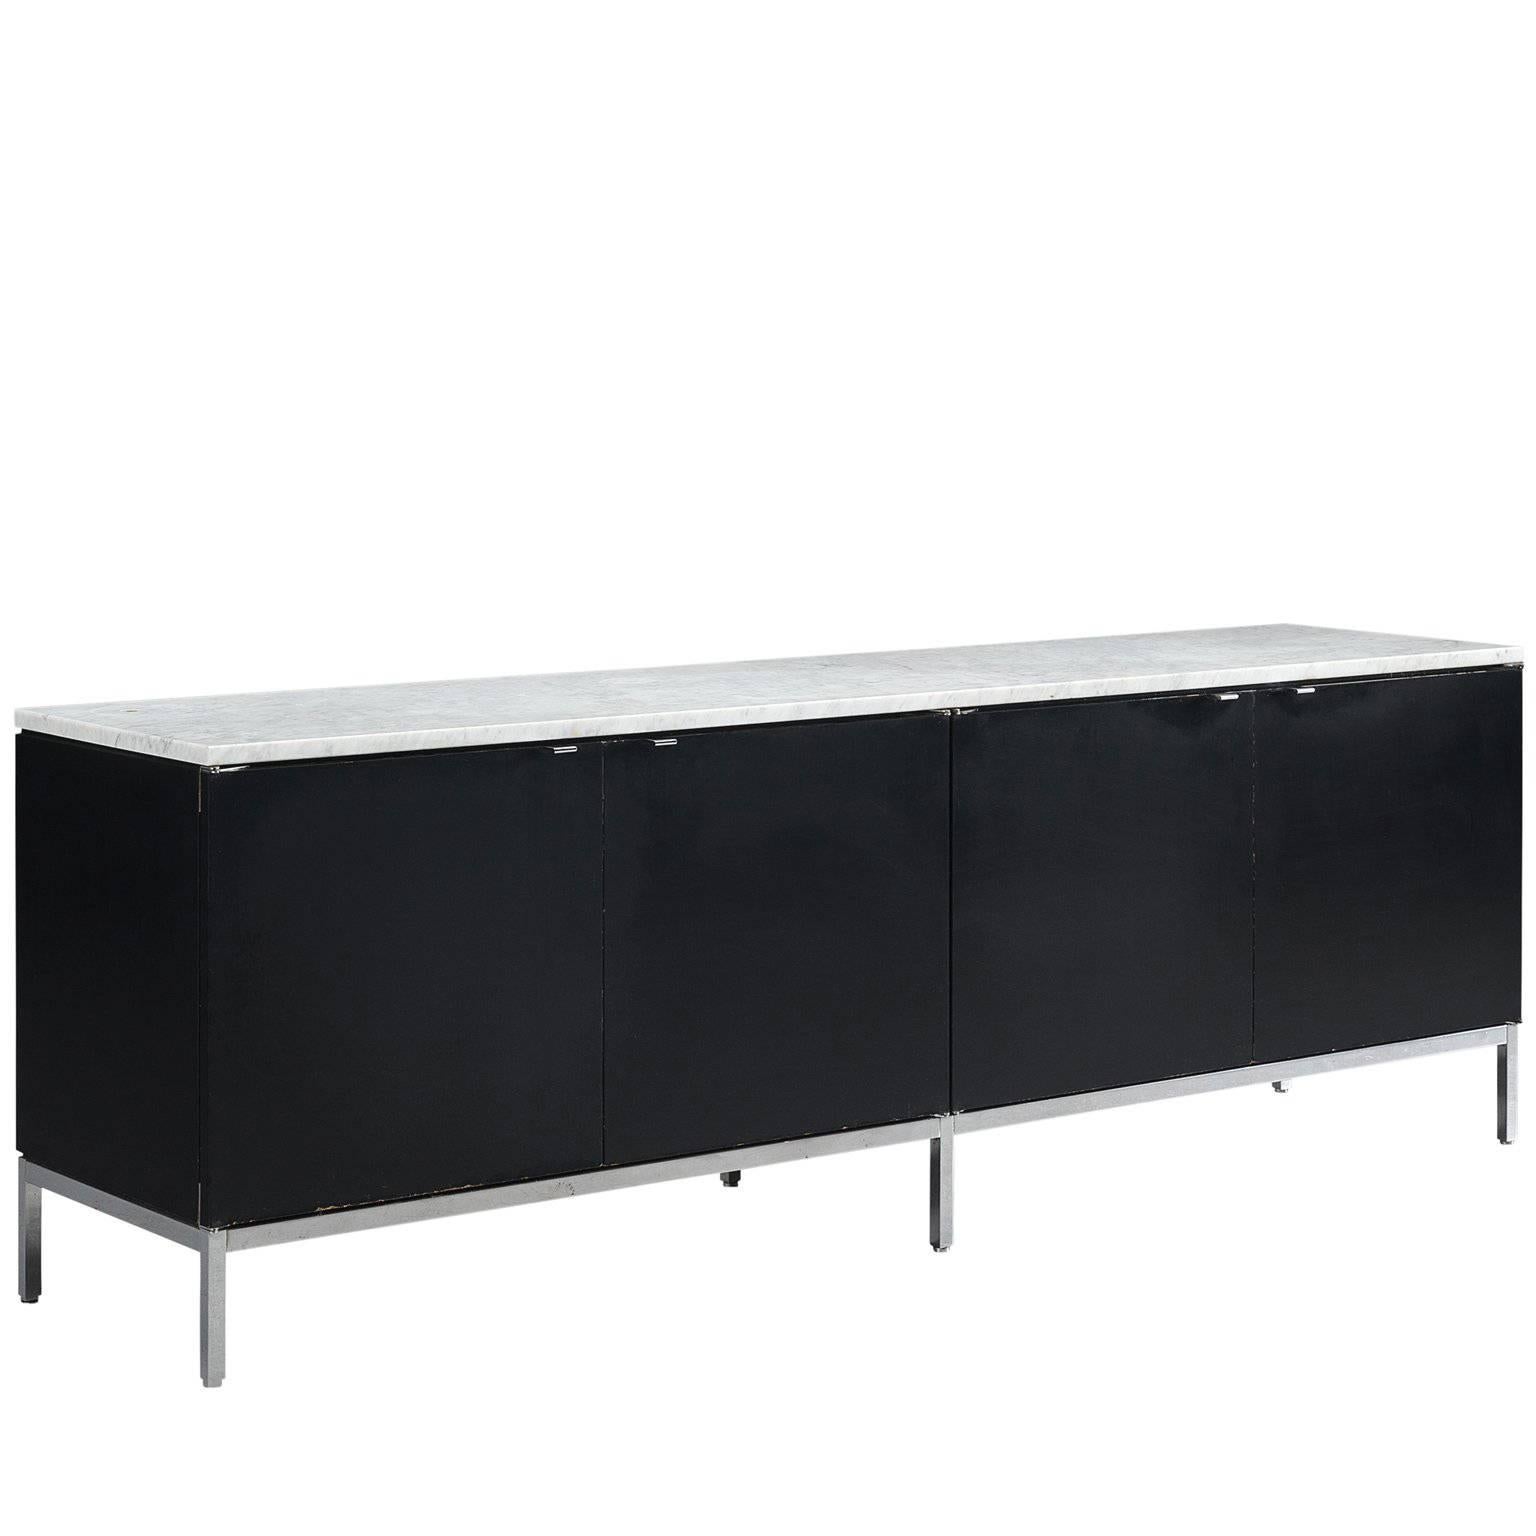 Florence Knoll Large Credenza in Black Wood and Marble